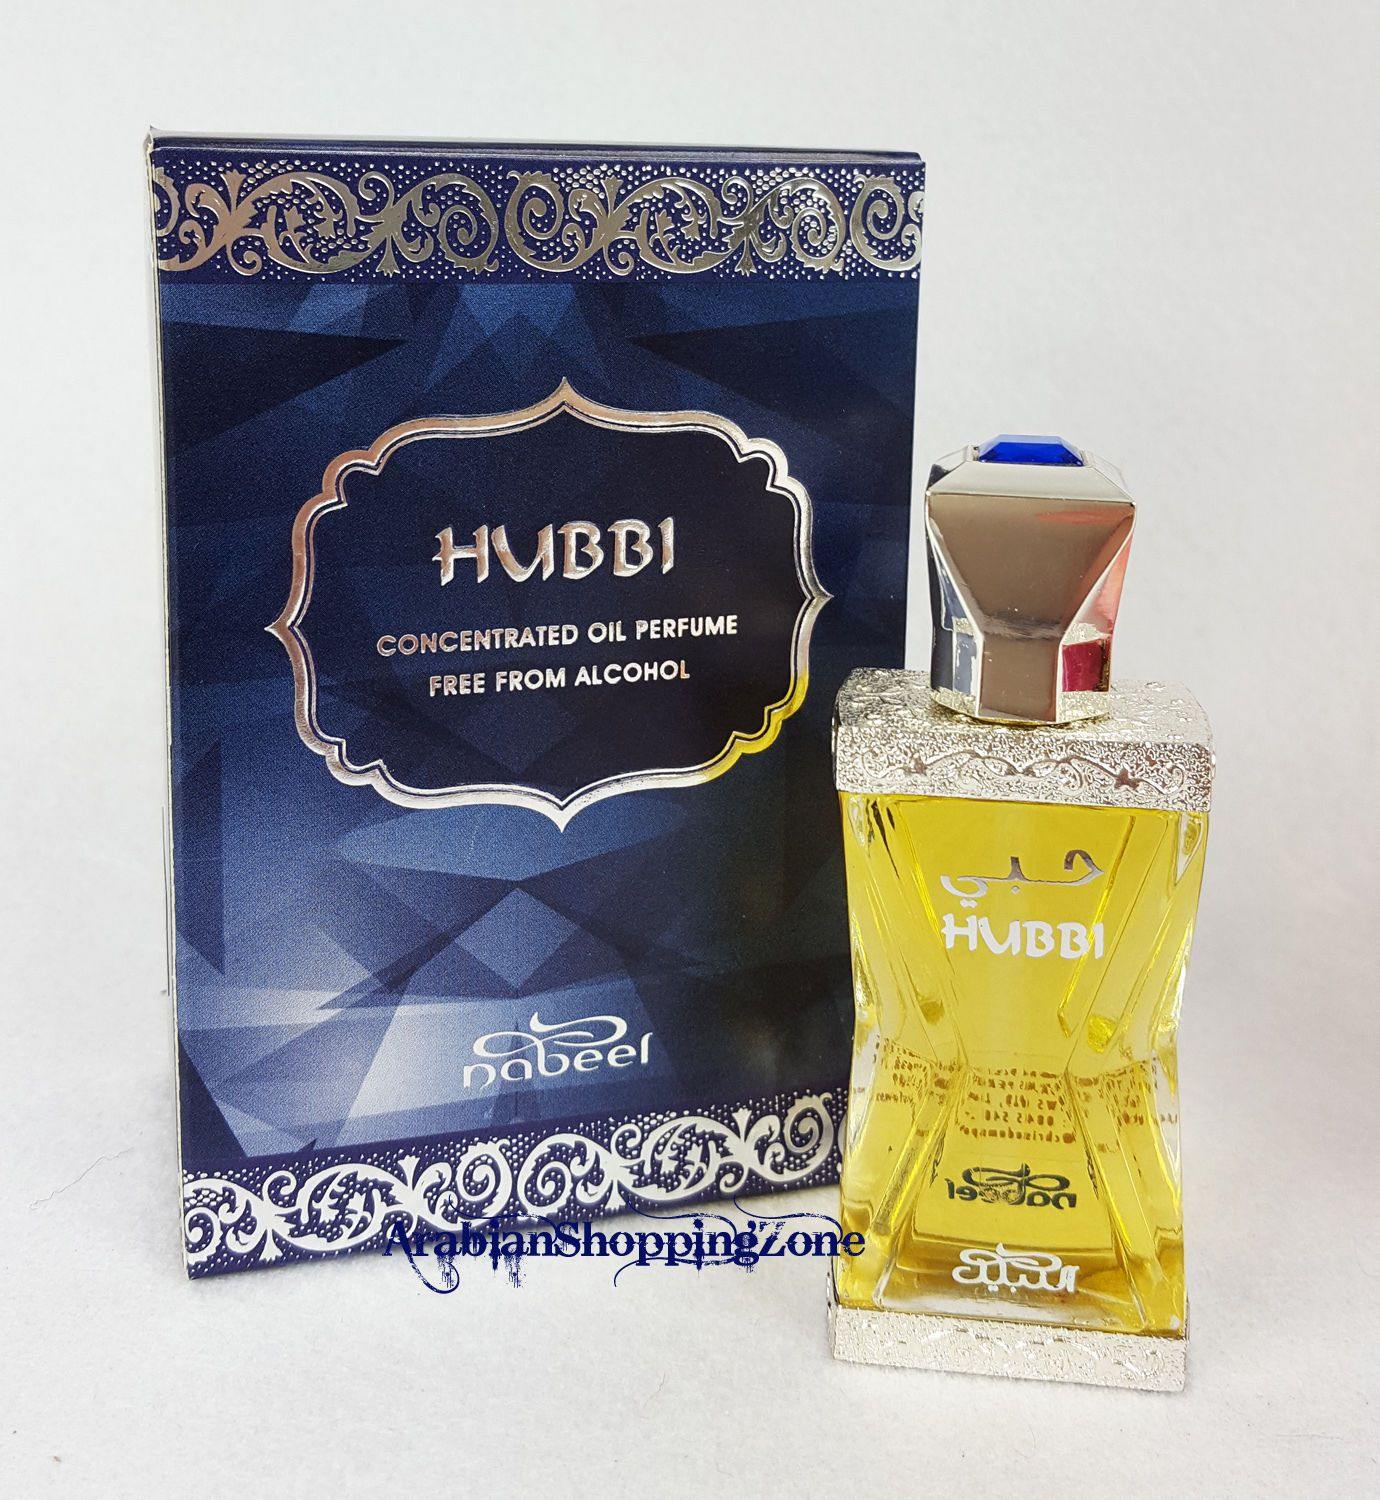 HUBBI by Nabeel 20ml Concentrated Oil Perfume Alcohol-Free - Arabian Shopping Zone